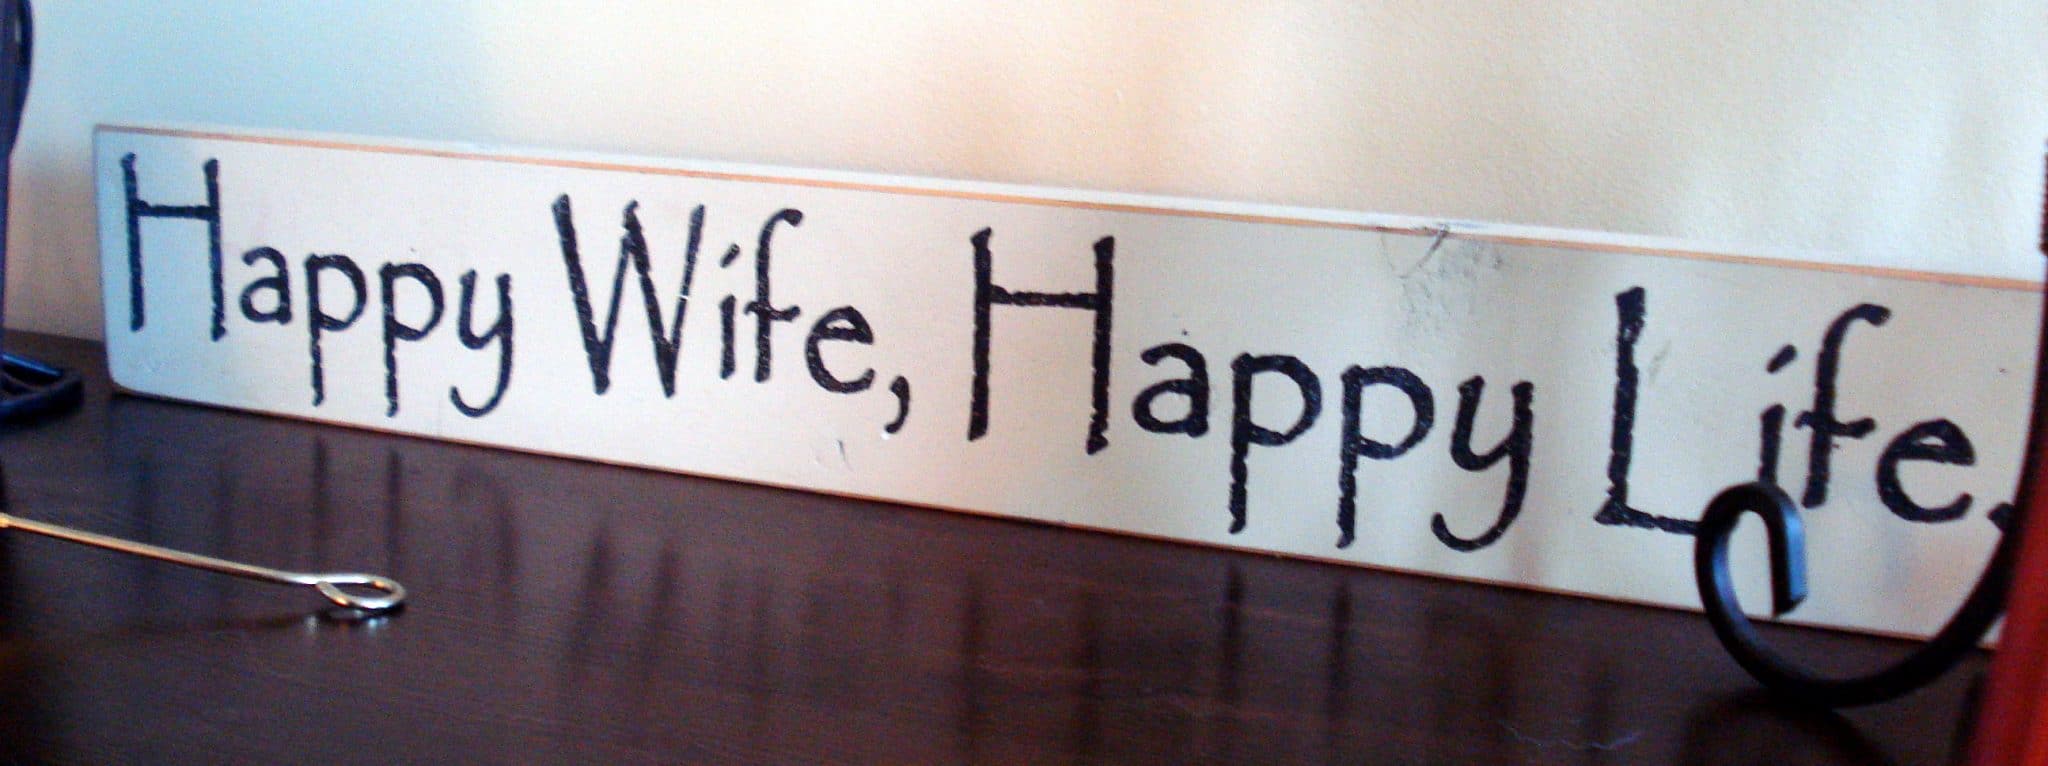 Download happy wife happy life sign - Airbus industrie a330-200